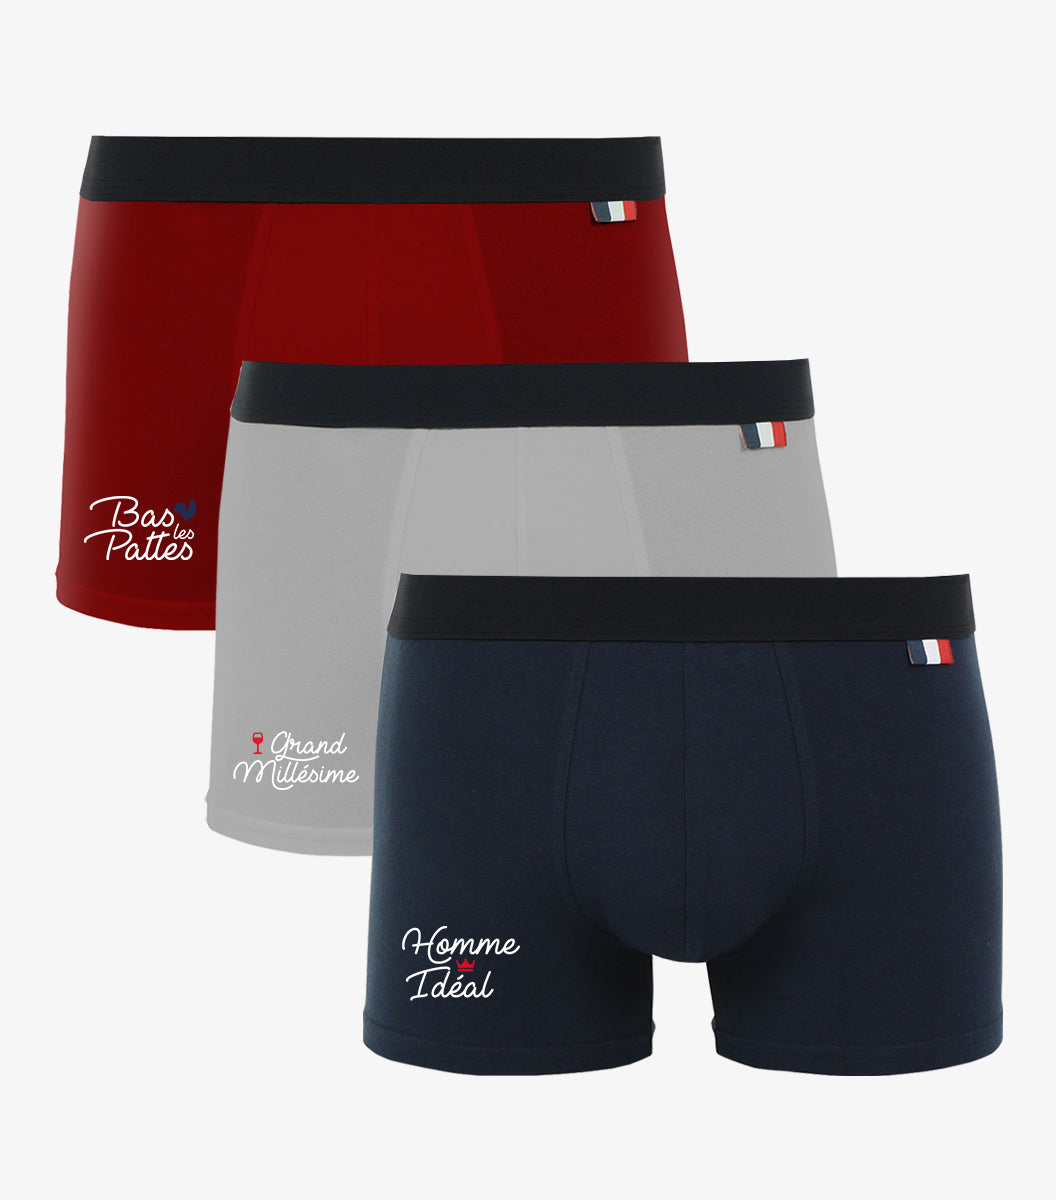 Boxer Homme x3 - Pack Homme Ideal